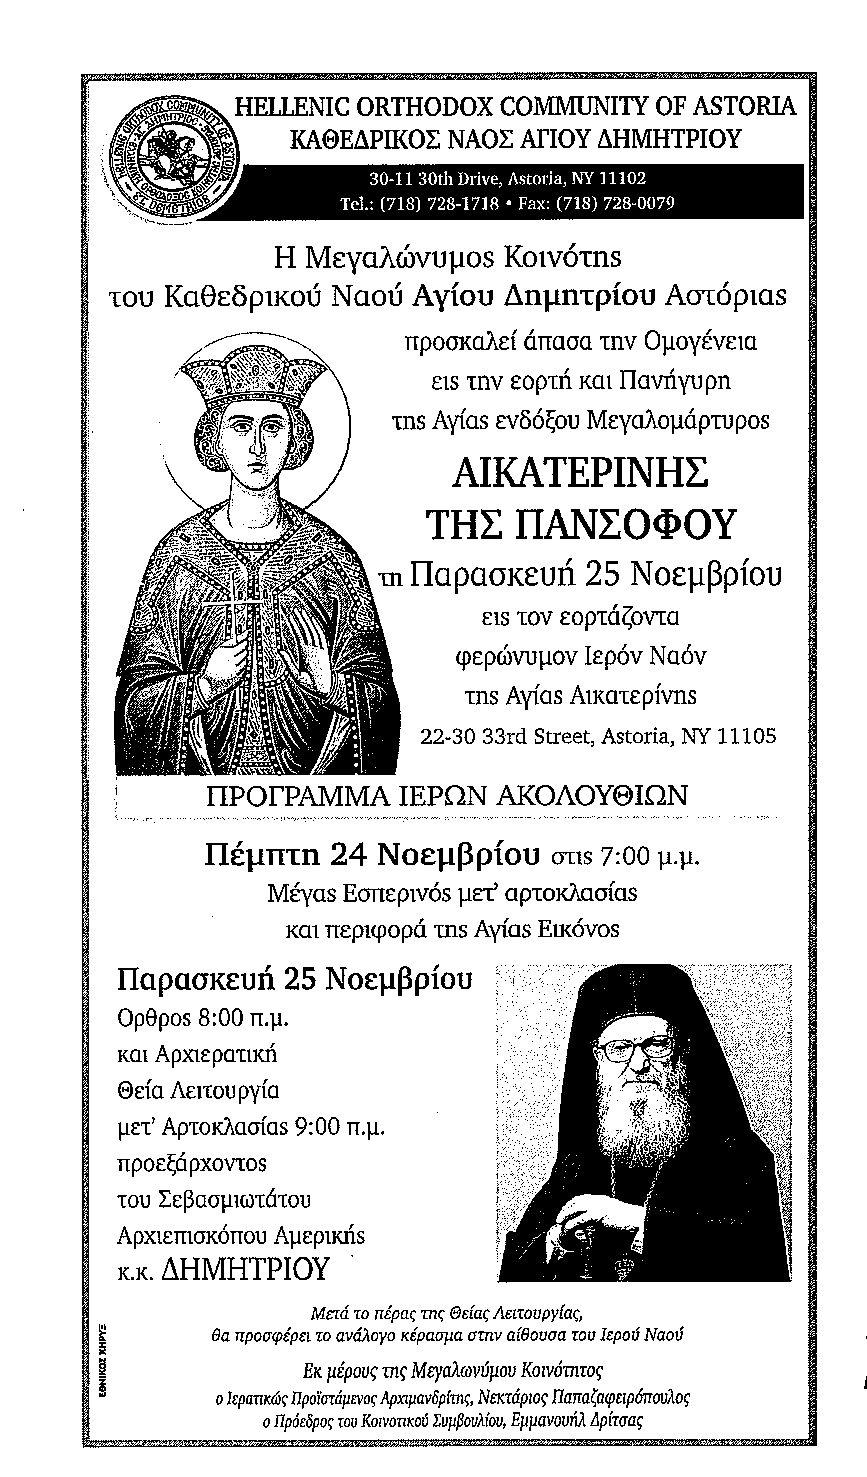 November 22nd to Goya Night or to the Church office (Fr. Anastasios). We will be assembling up in the gym 30 boxes of a Turkey Dinner with all the trimmings.